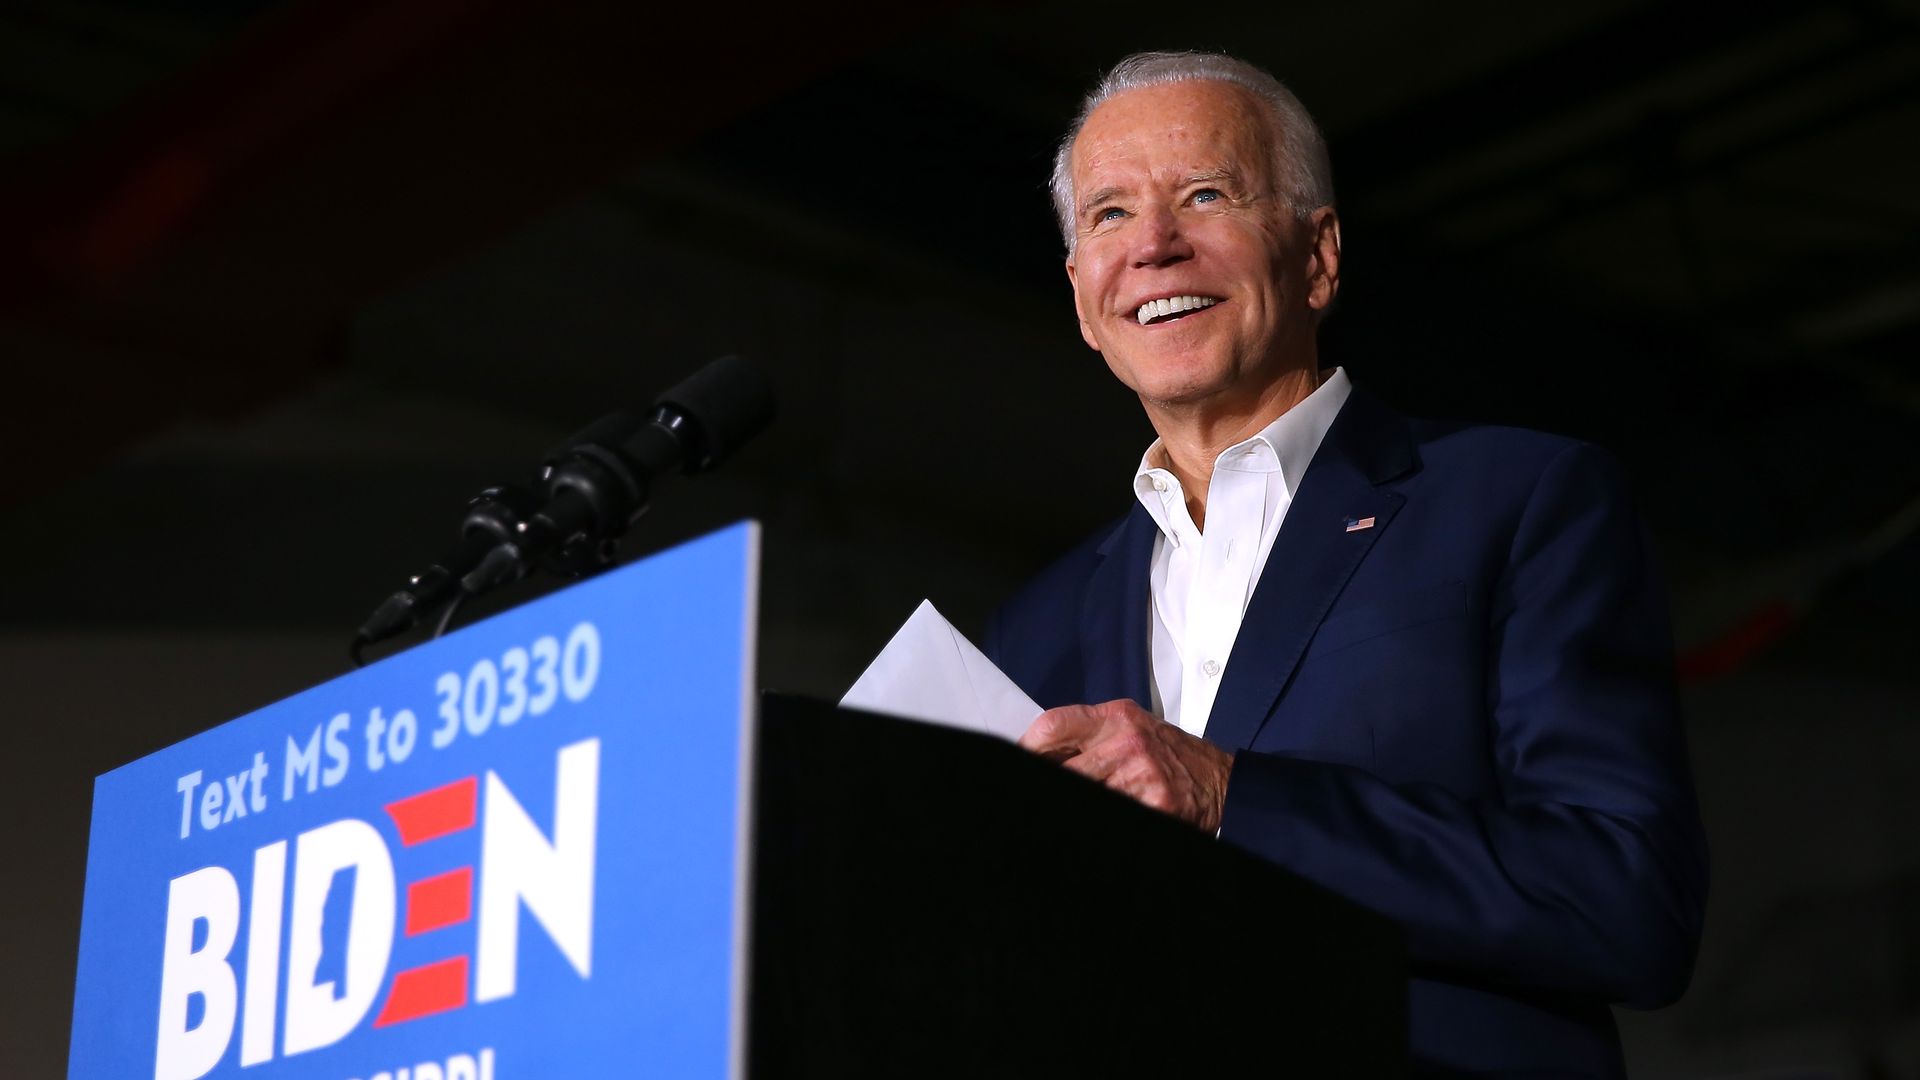  Democratic presidential candidate former Vice President Joe Biden speaks at a campaign event at Tougaloo College on March 08, 2020 in Tougaloo, Mississippi.